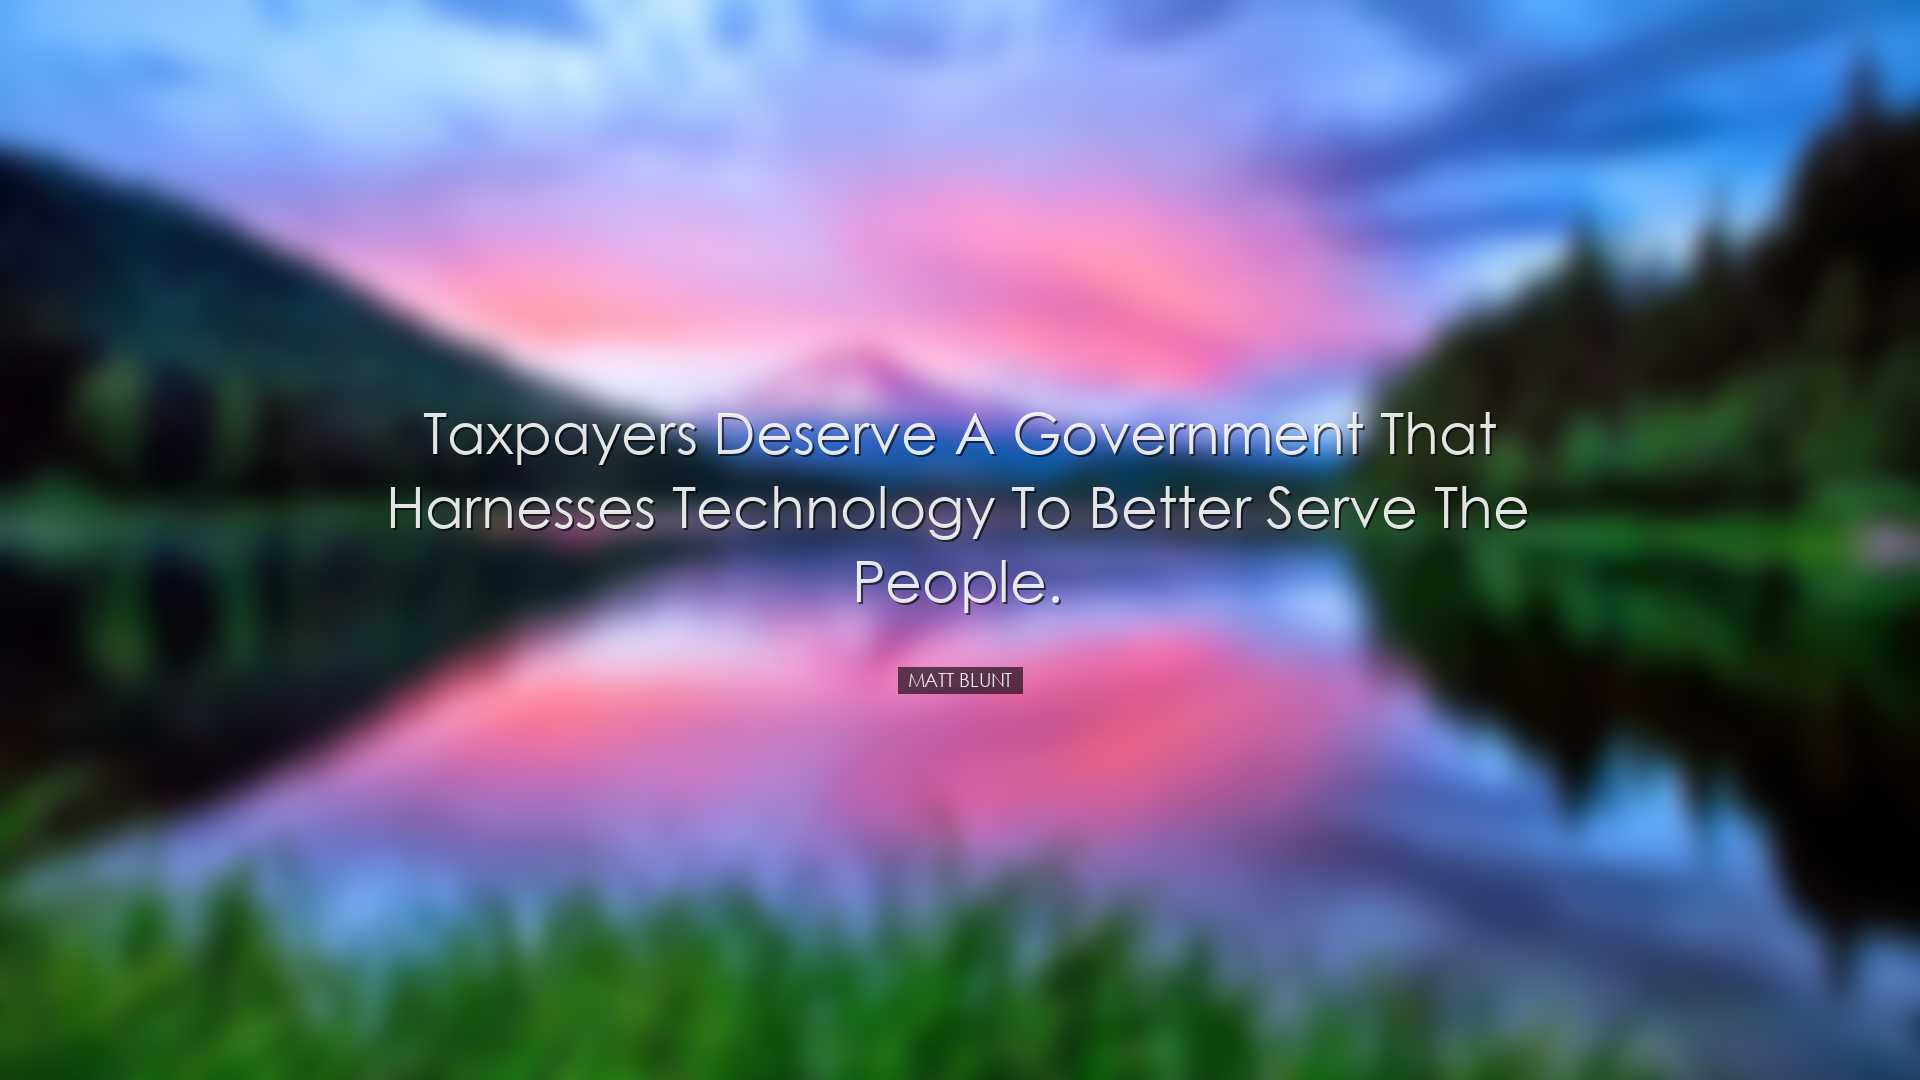 Taxpayers deserve a government that harnesses technology to better